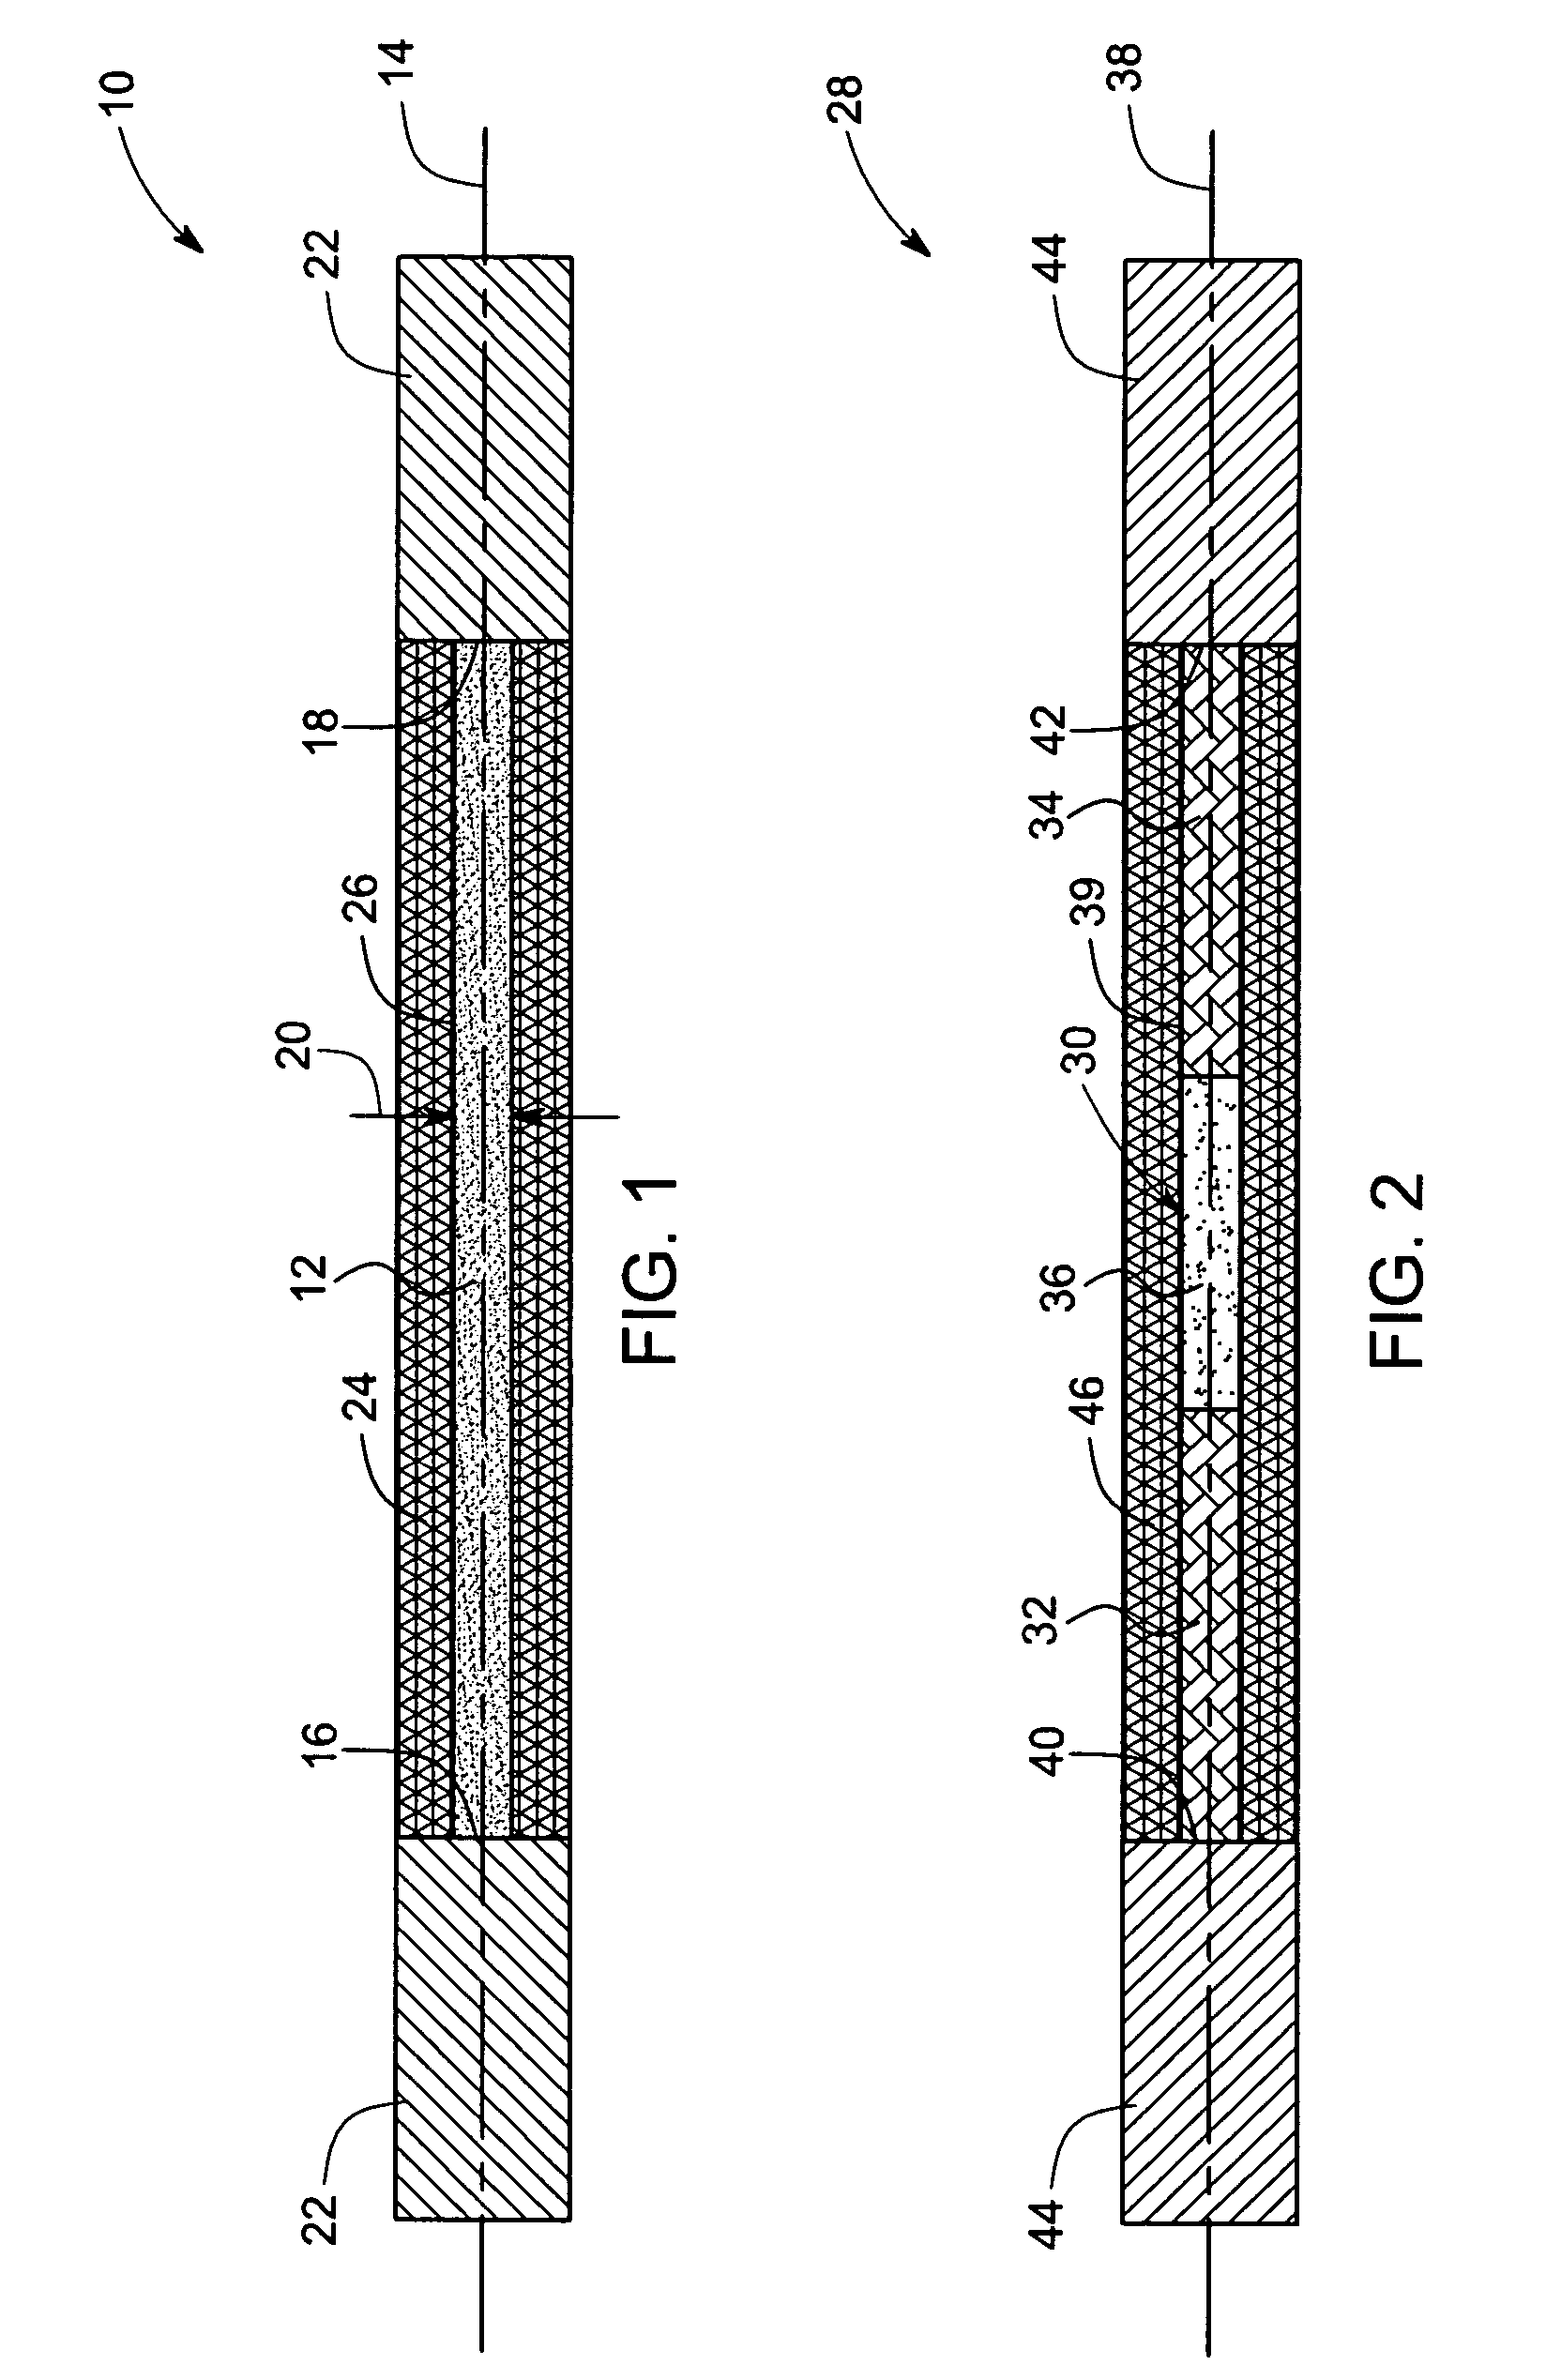 Nanowire structures and devices for use in large-area electronics and methods of making the same